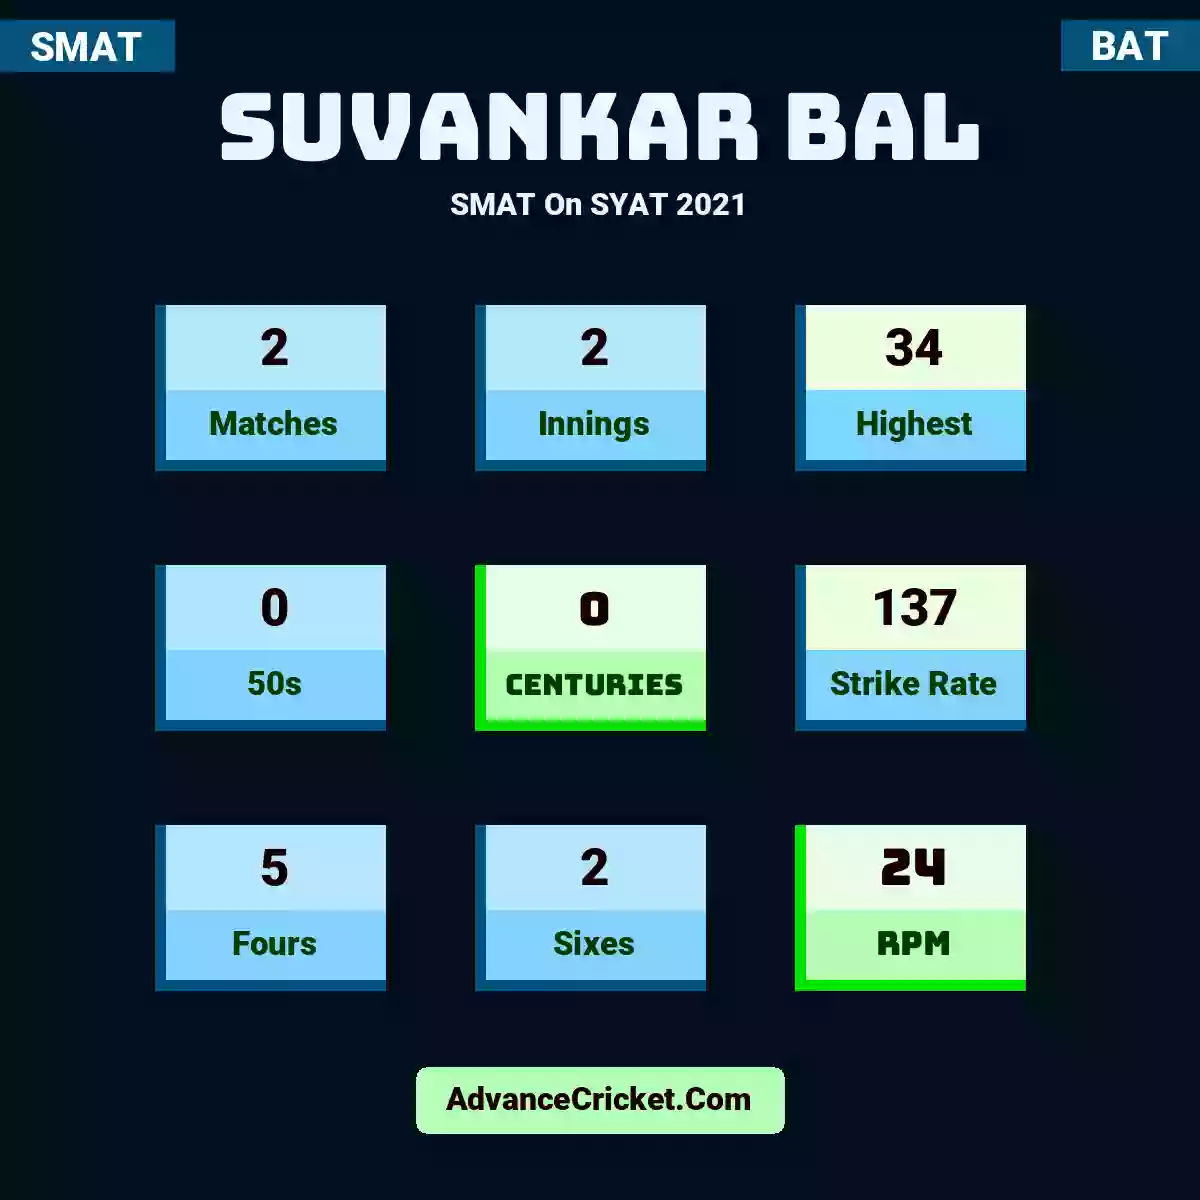 Suvankar Bal SMAT  On SYAT 2021, Suvankar Bal played 2 matches, scored 34 runs as highest, 0 half-centuries, and 0 centuries, with a strike rate of 137. S.Bal hit 5 fours and 2 sixes, with an RPM of 24.